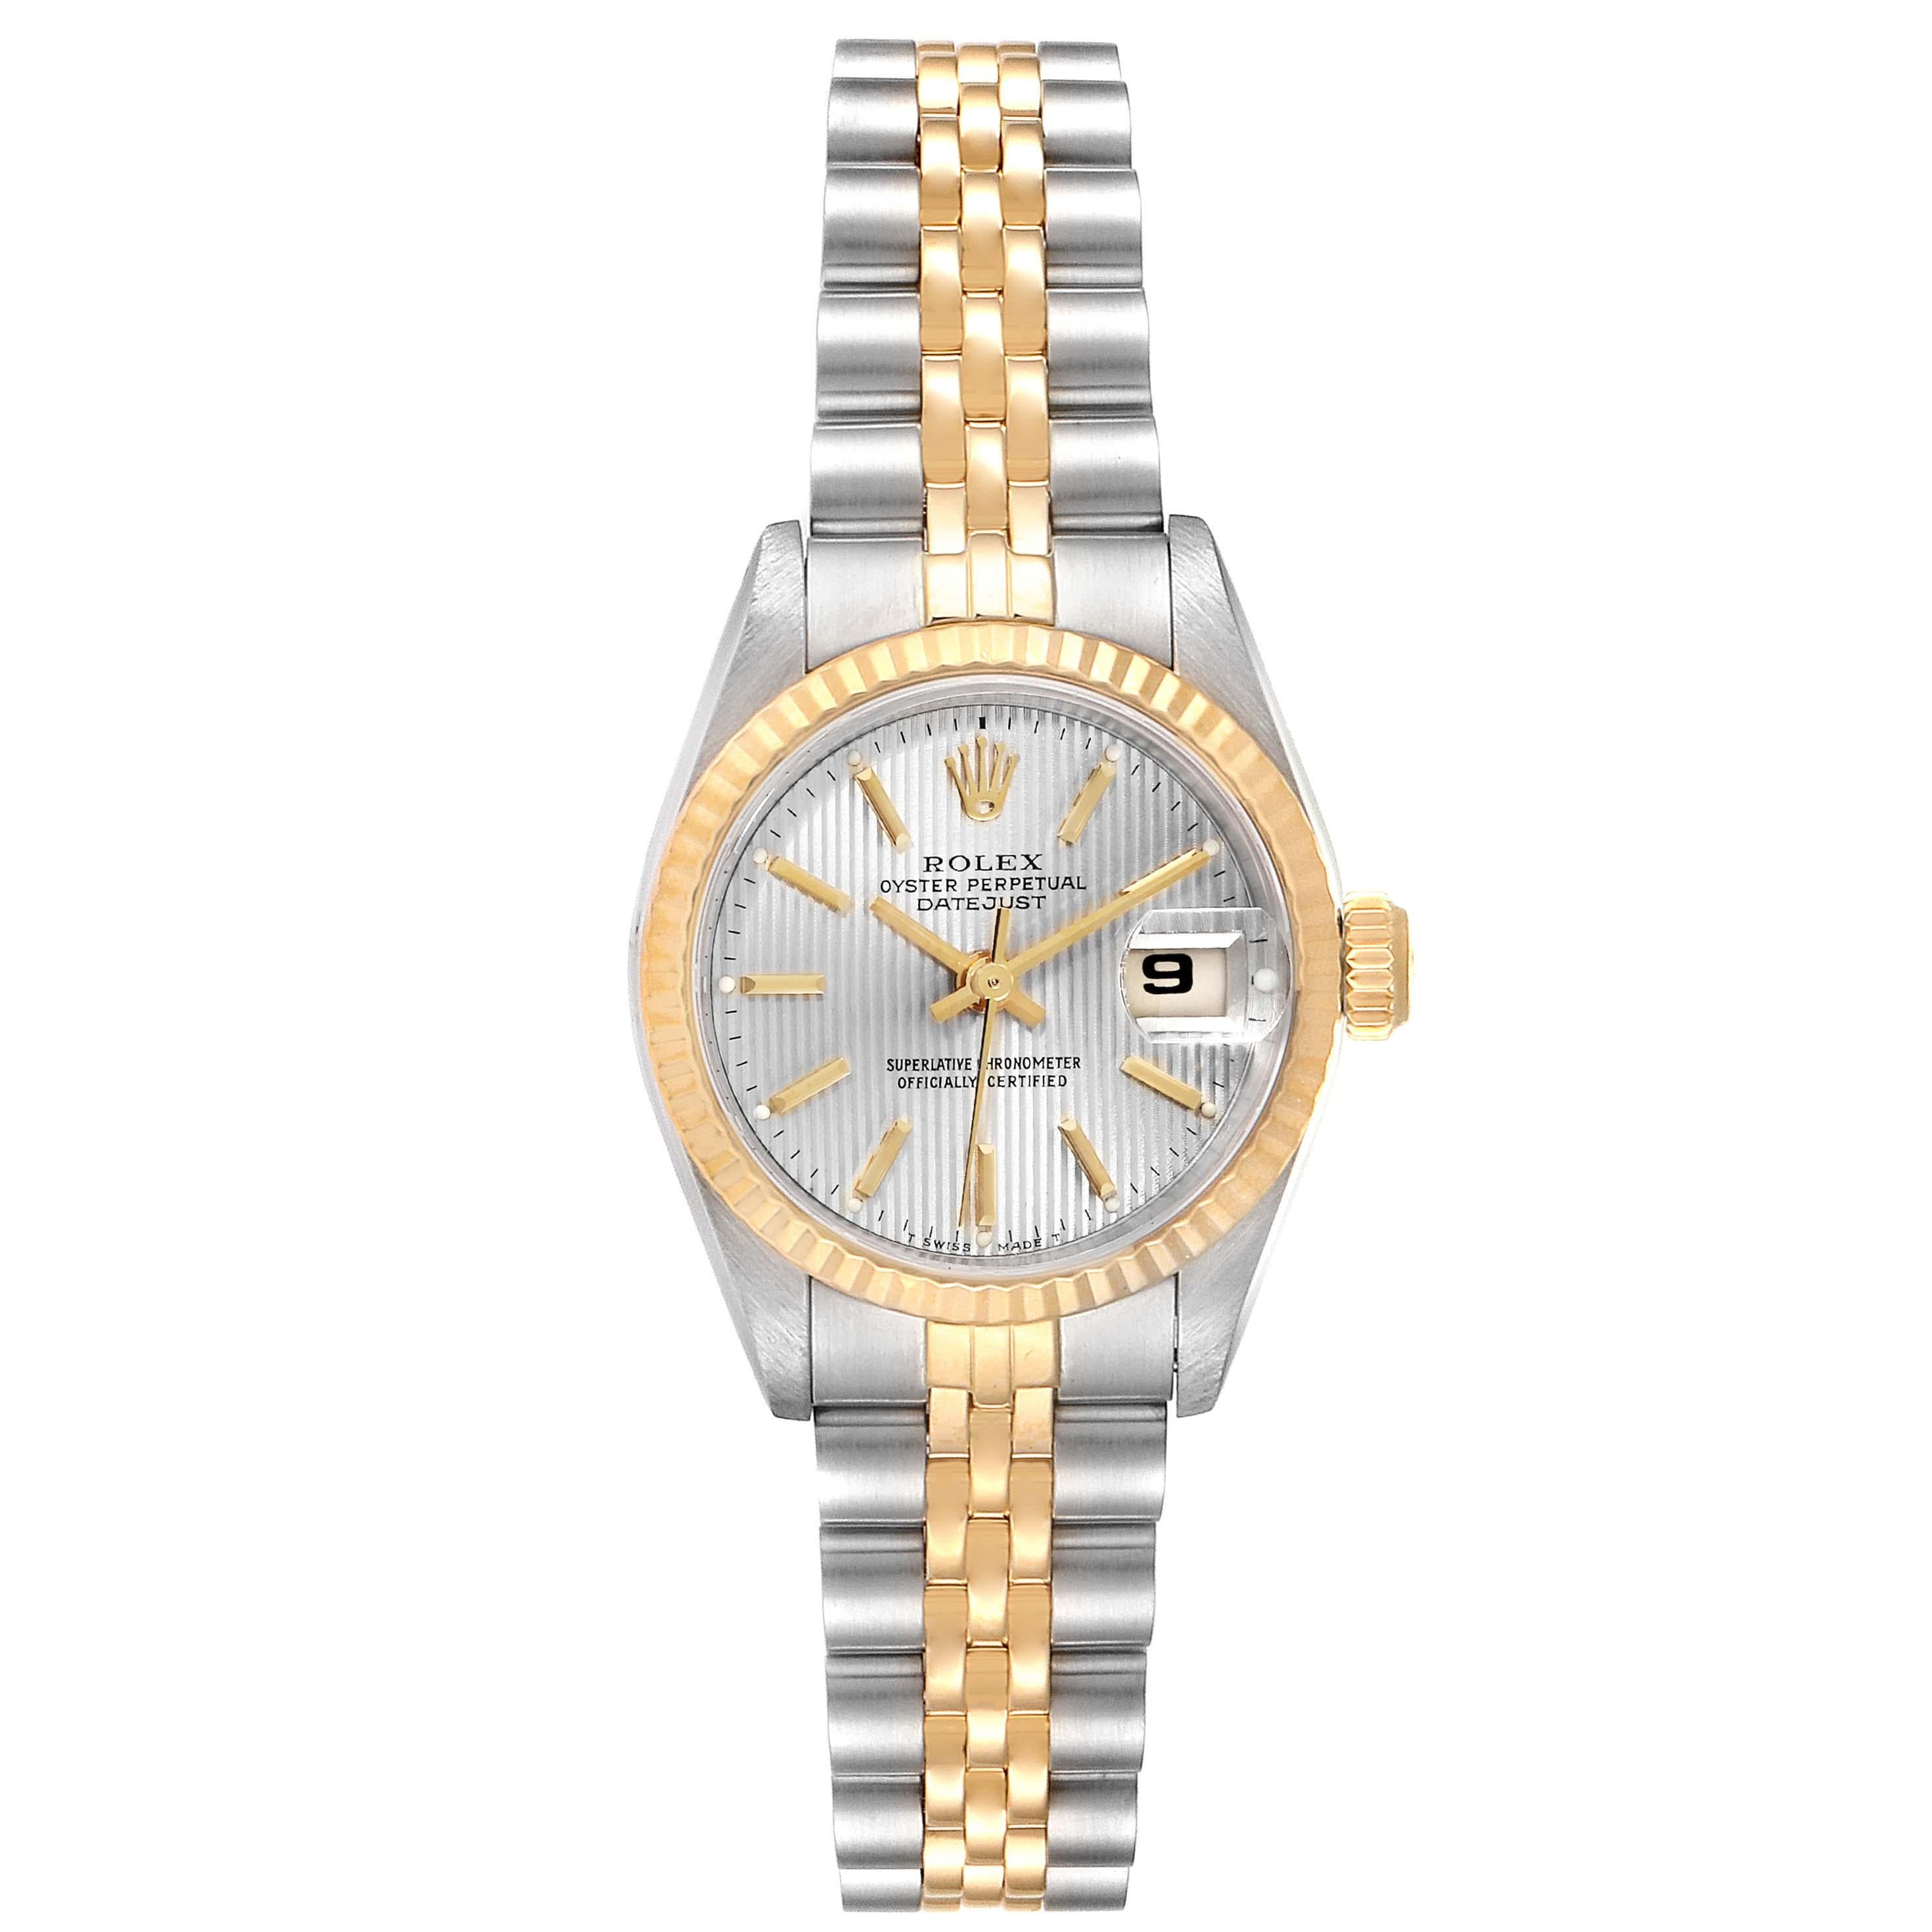 Rolex Datejust Steel Yellow Gold Tapestry Dial Ladies Watch 69173 Box Papers. Officially certified chronometer self-winding movement. Stainless steel oyster case 26 mm in diameter. Rolex logo on a crown. 18k yellow gold fluted bezel. Scratch